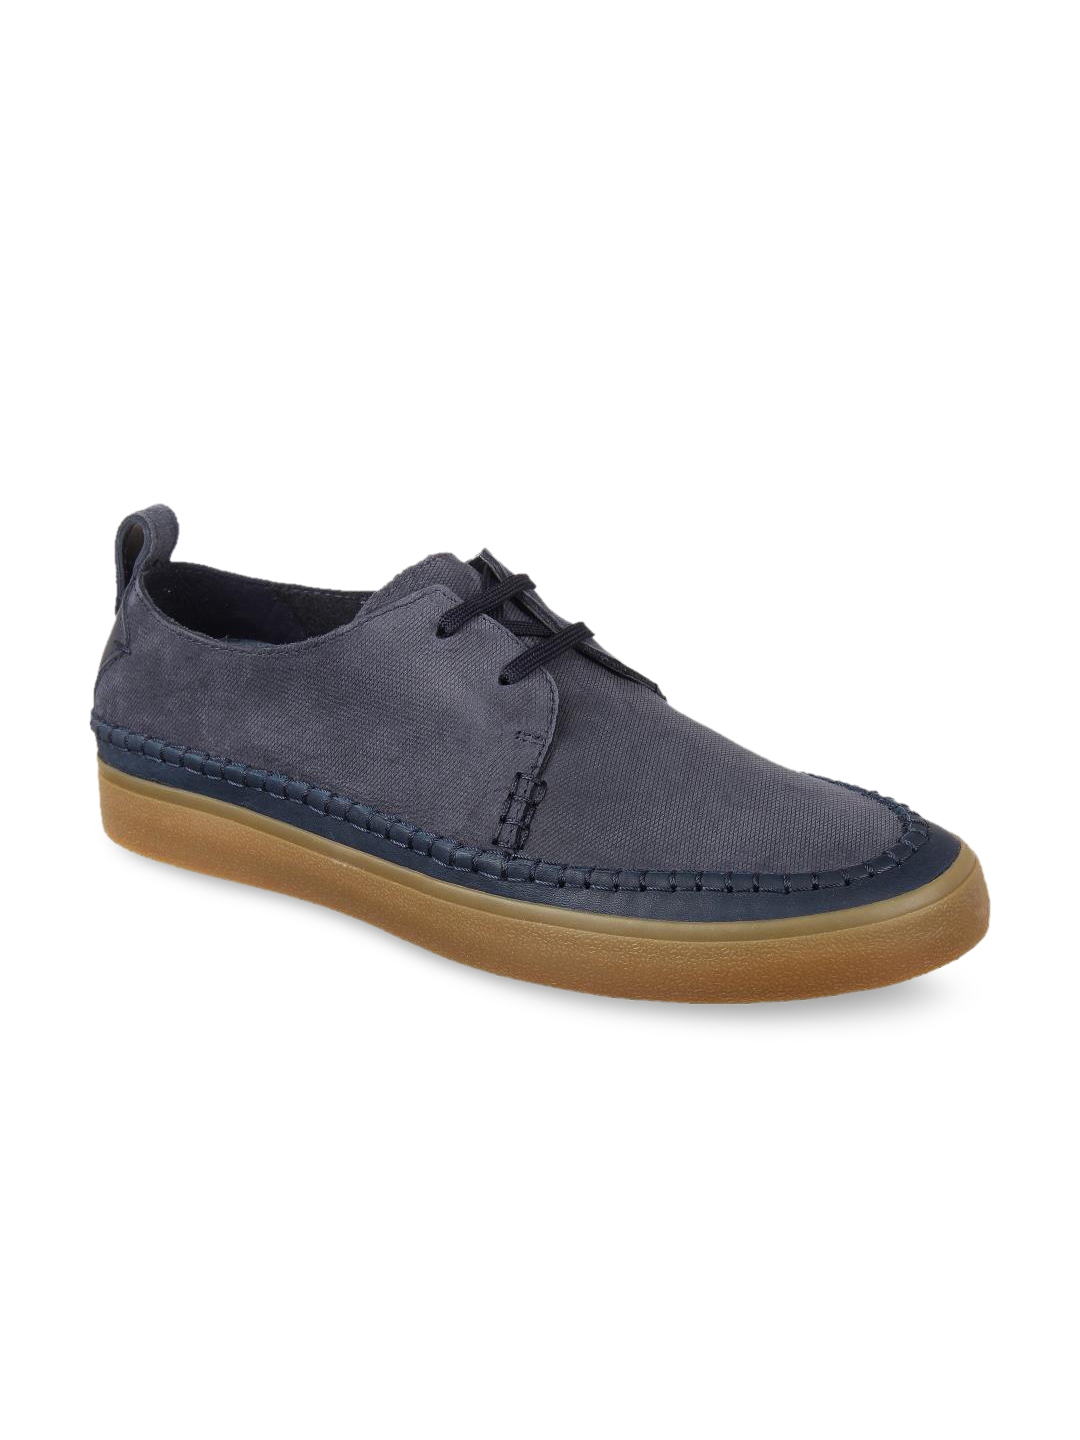 Buy Clarks Men Canvas Sneakers - Casual Shoes for Men 9491765 | Myntra